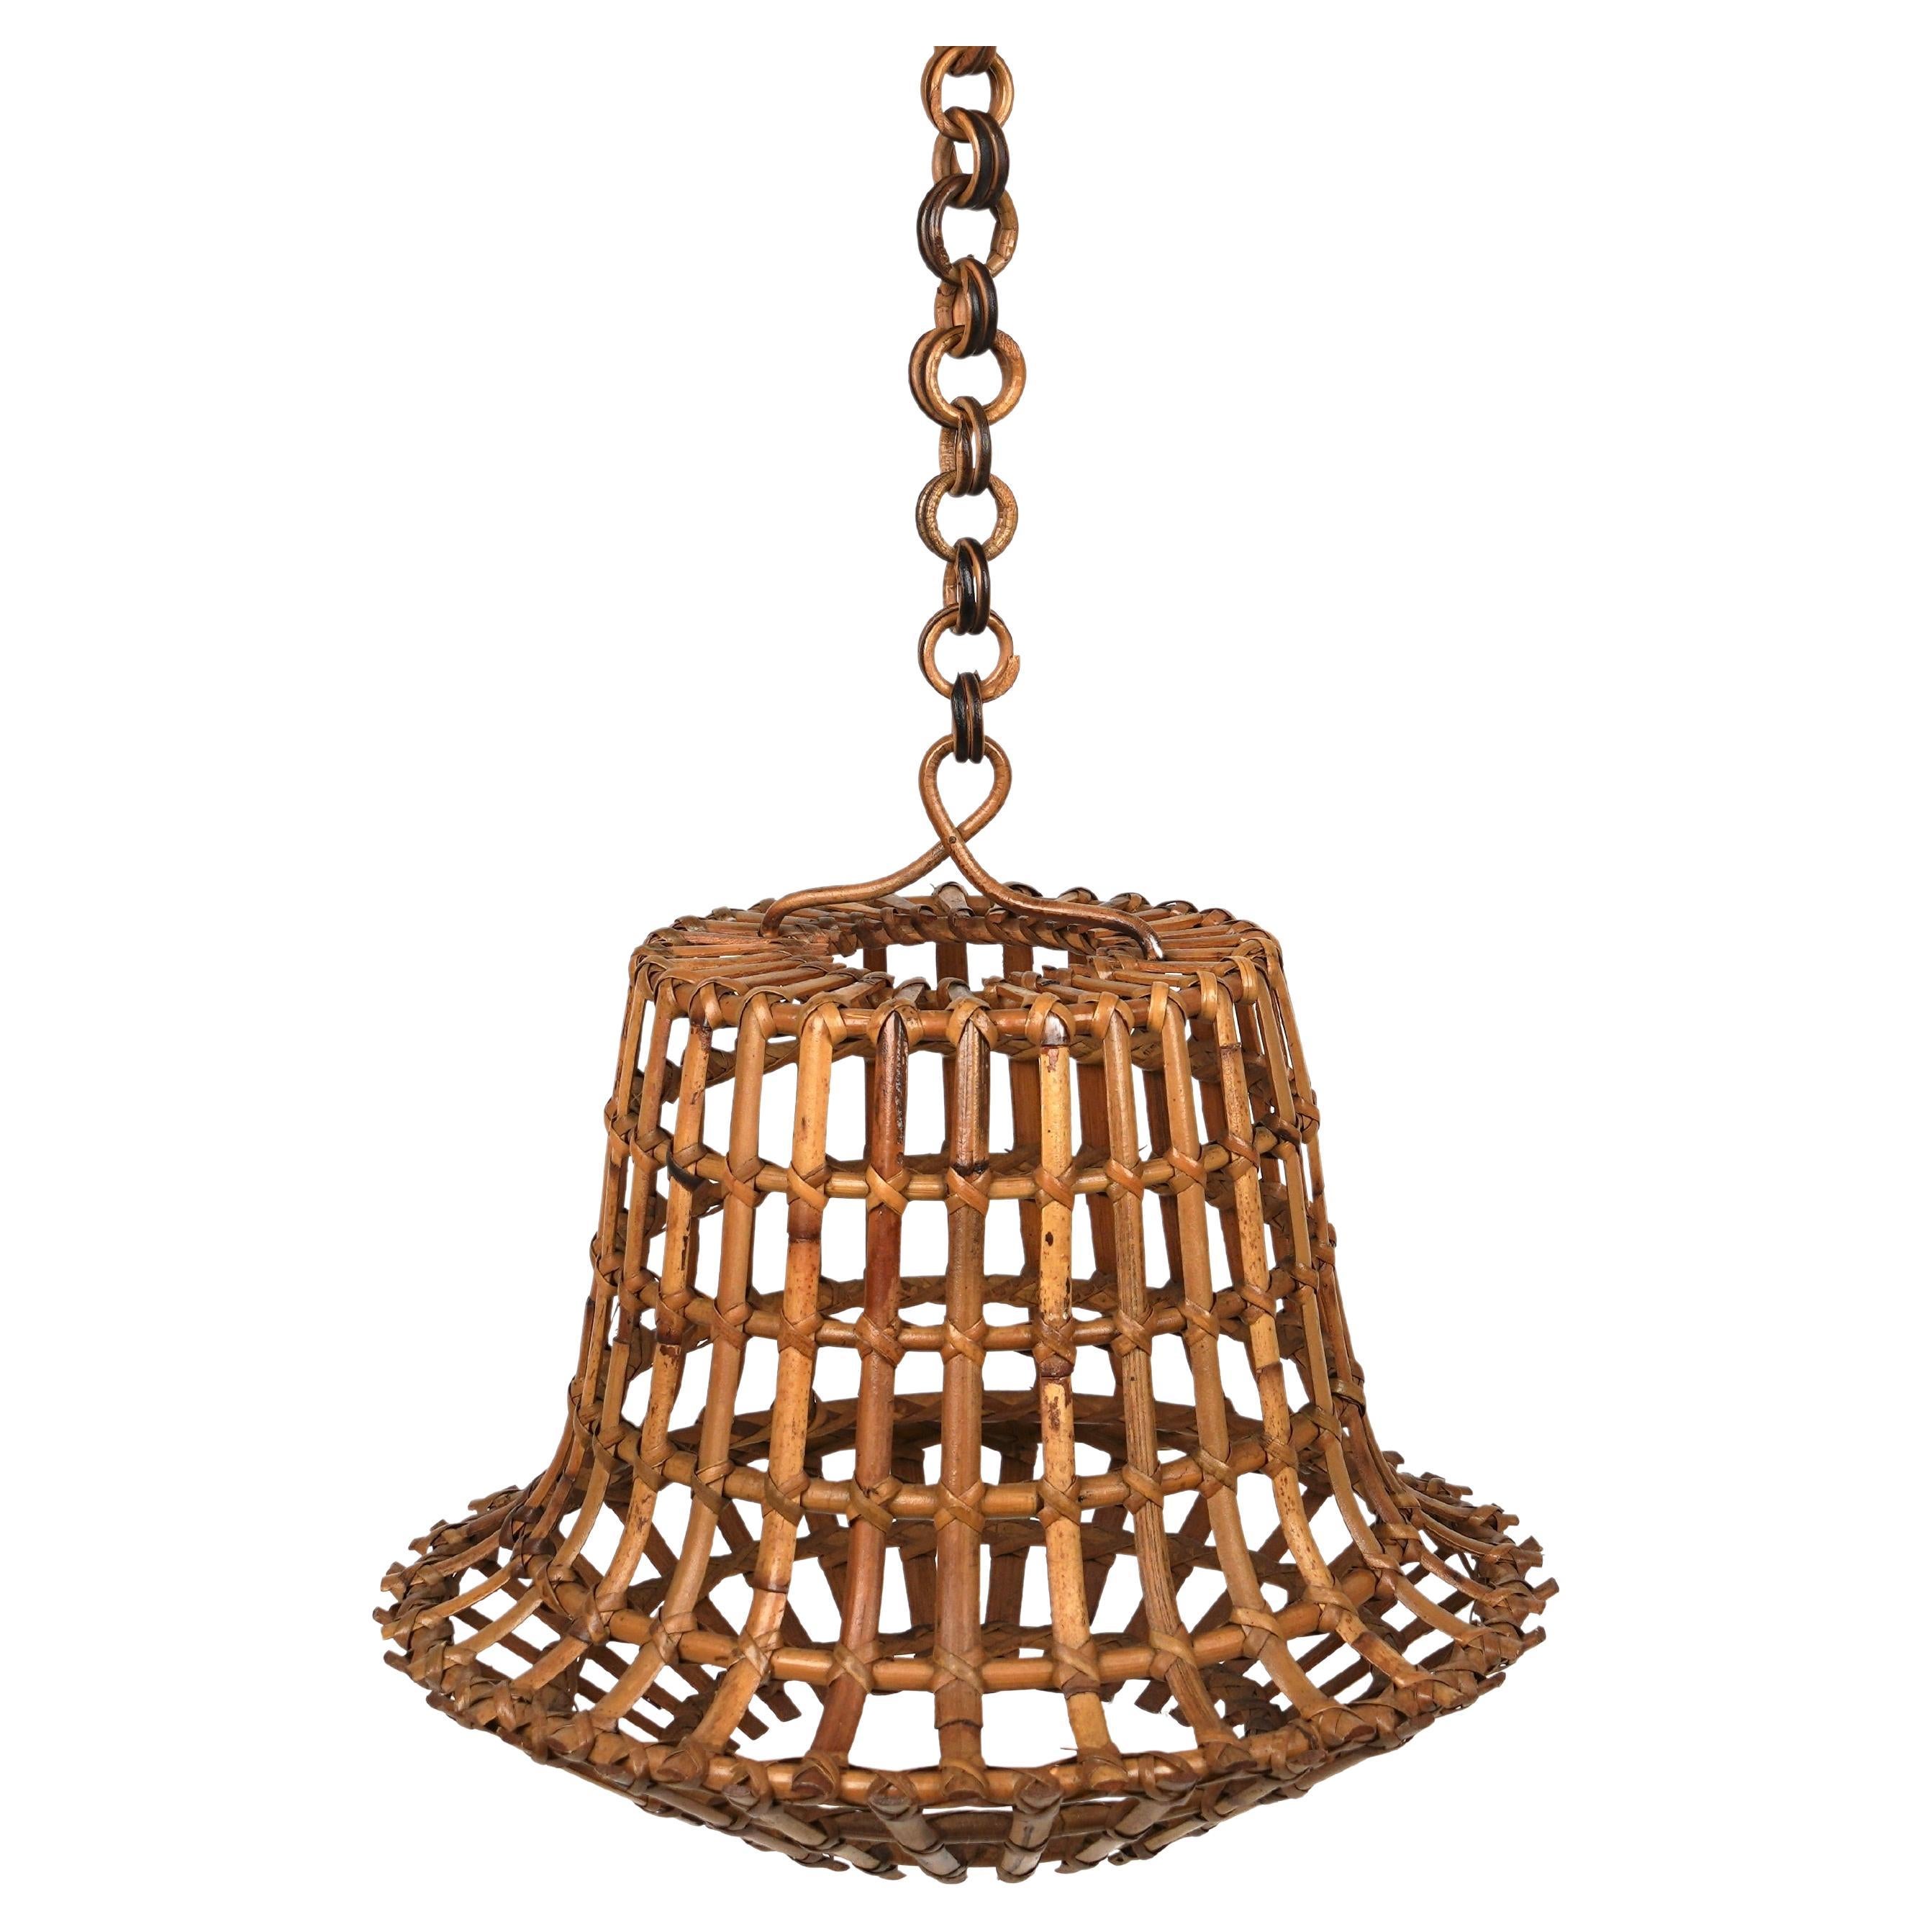 Midcentury Bamboo and Rattan Chandelier Louis Sognot Style, Italy 1960s